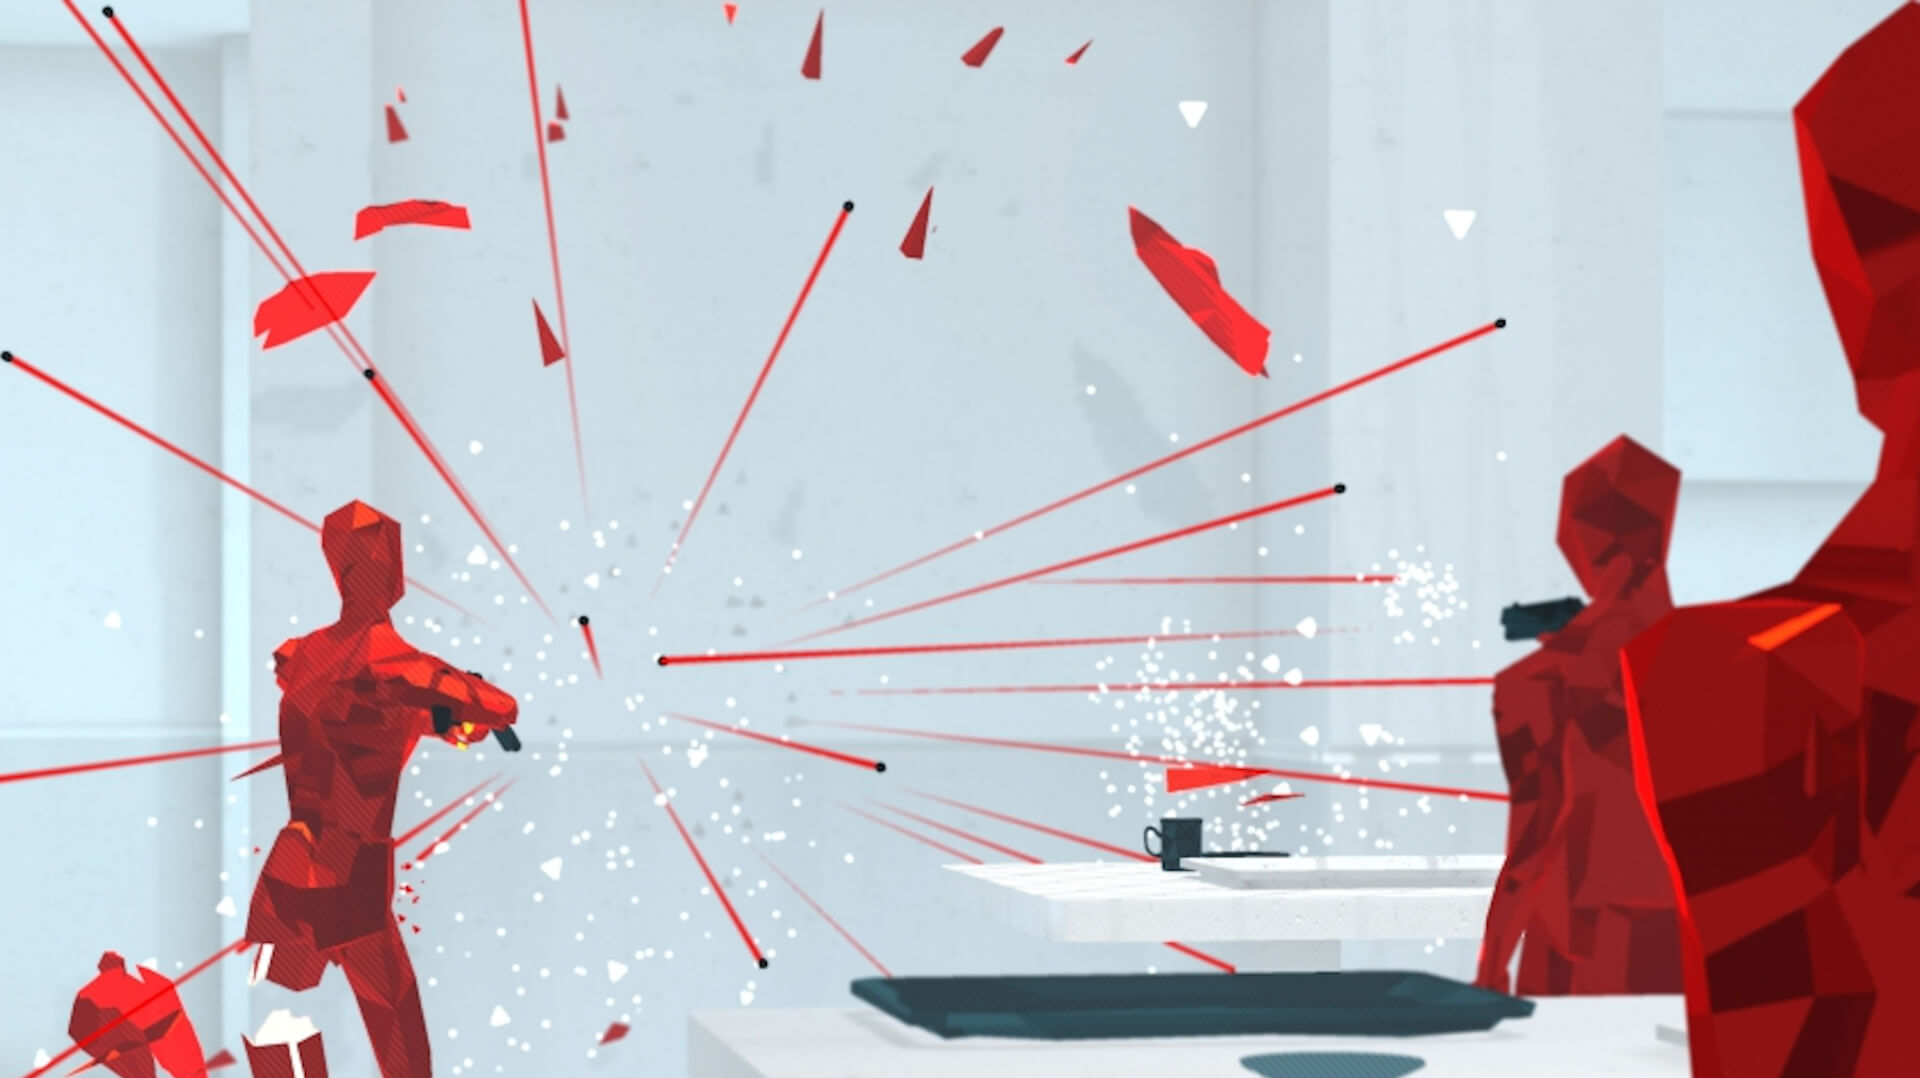 SUPERHOT Free On Epic Games Store